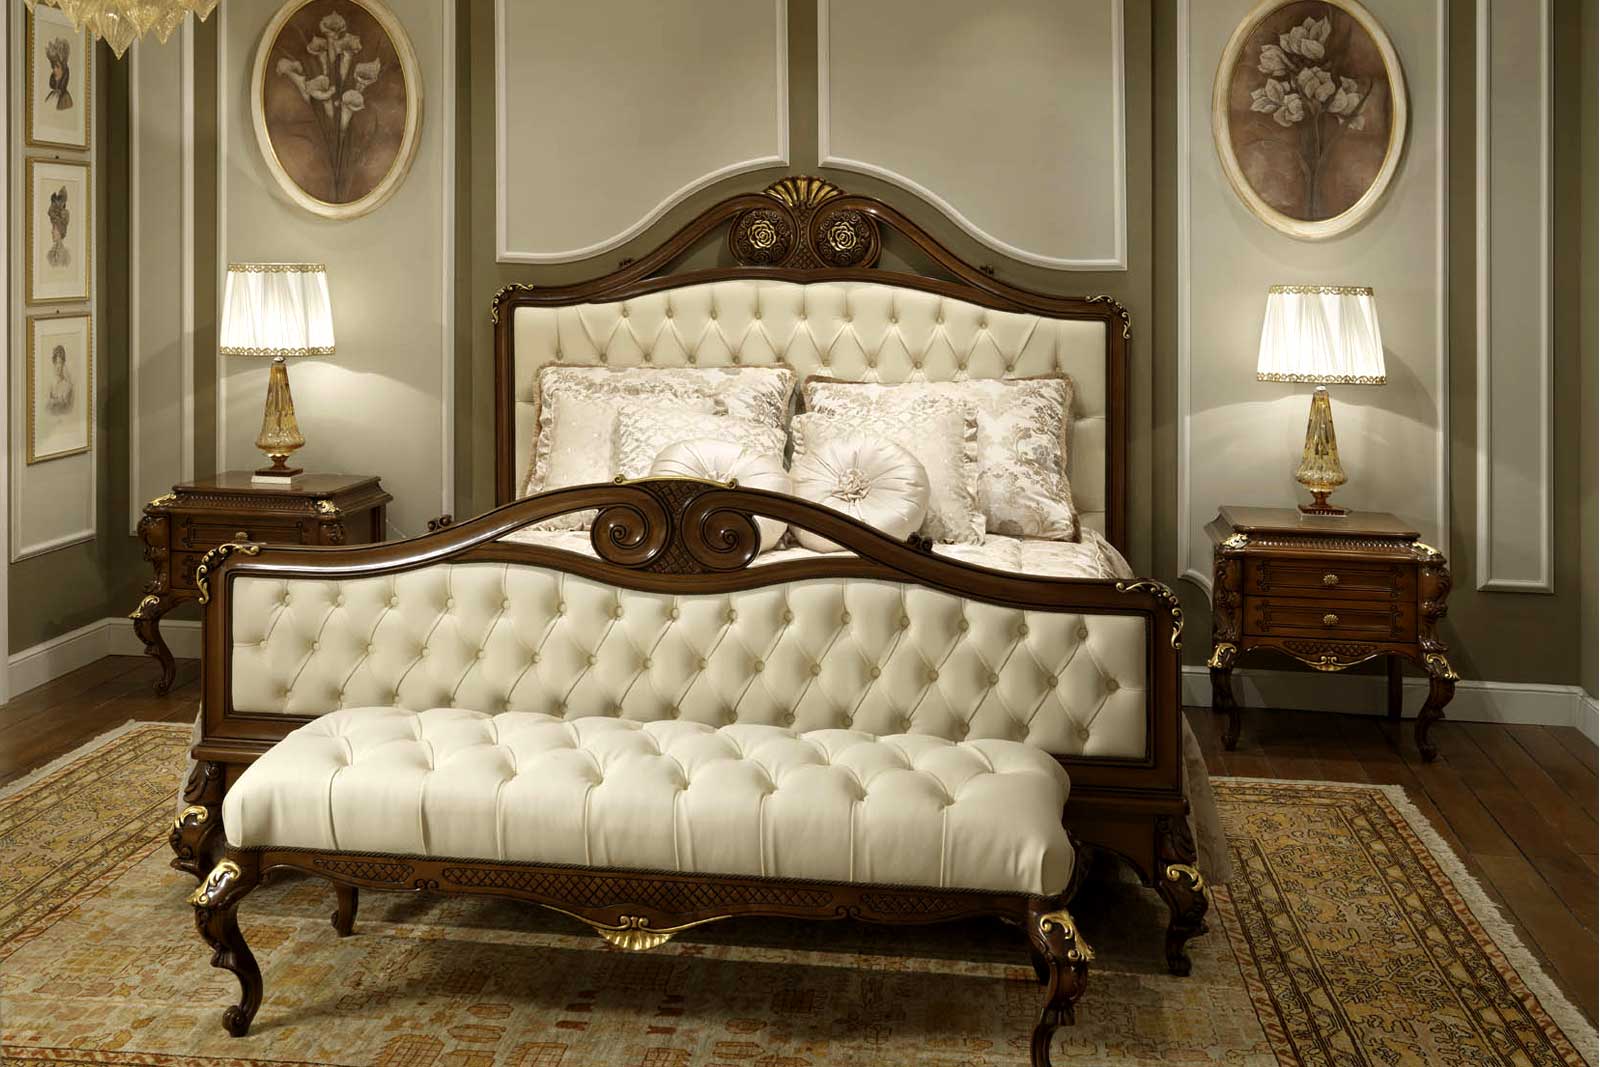 Make a style statement with Luxury bedroom furniture